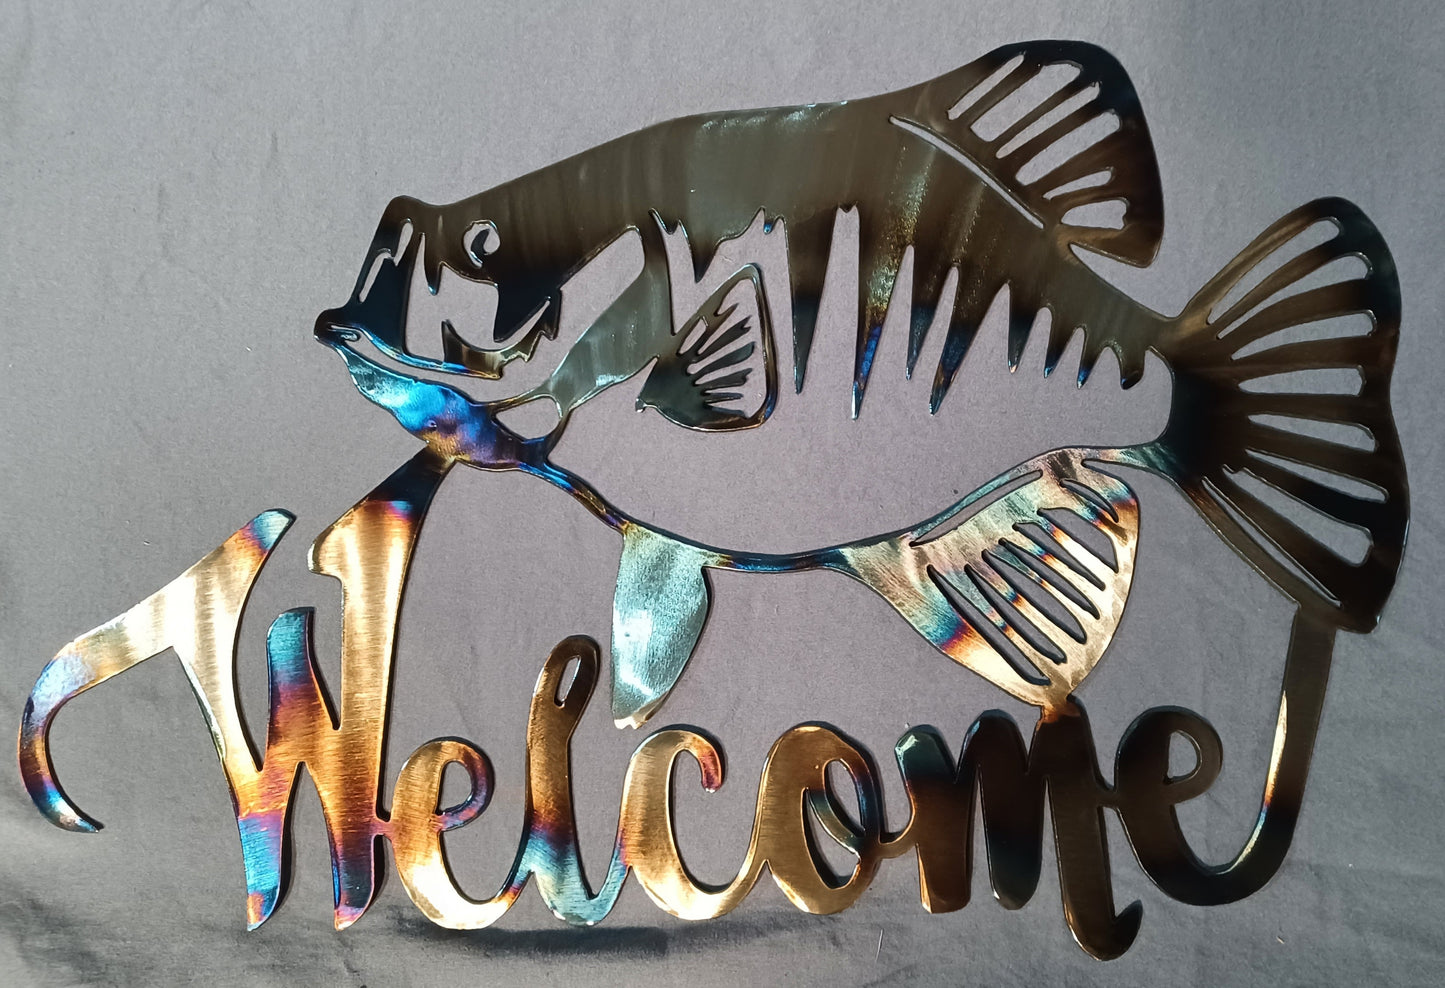 Crappie Welcome Sign